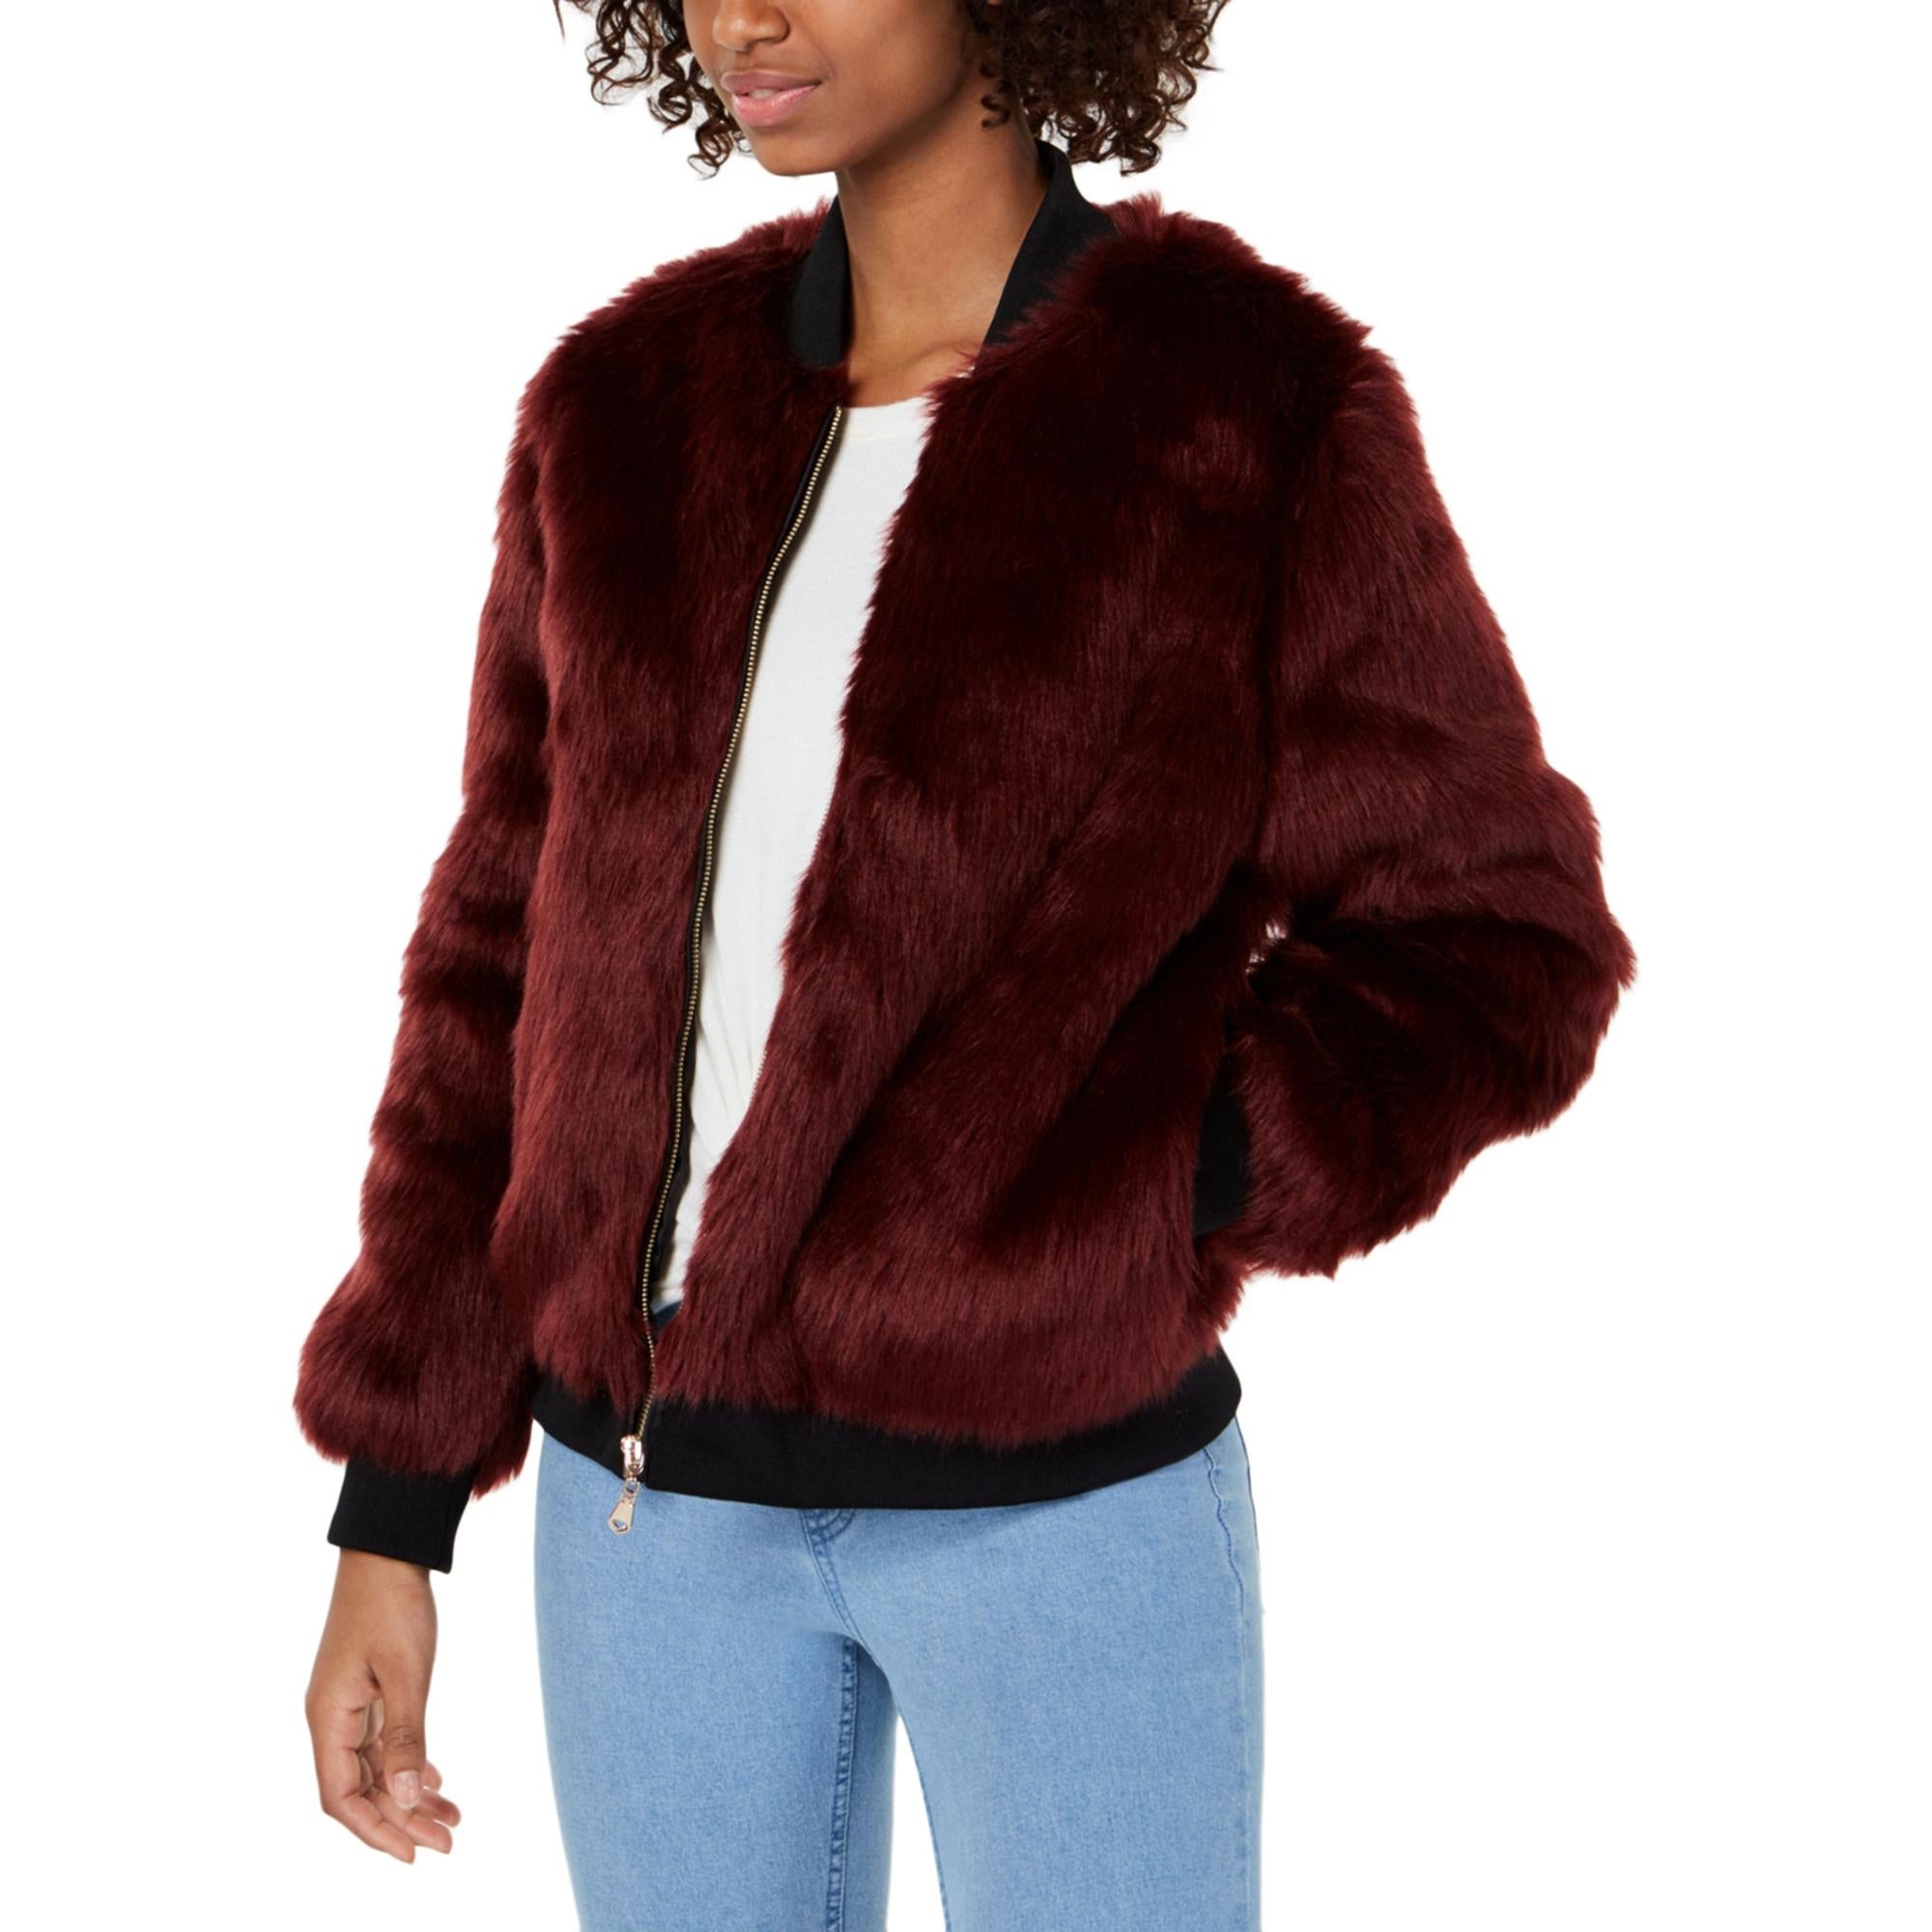 Say What? Juniors' Faux-Fur Jacket Red Size Extra Large - image 1 of 3